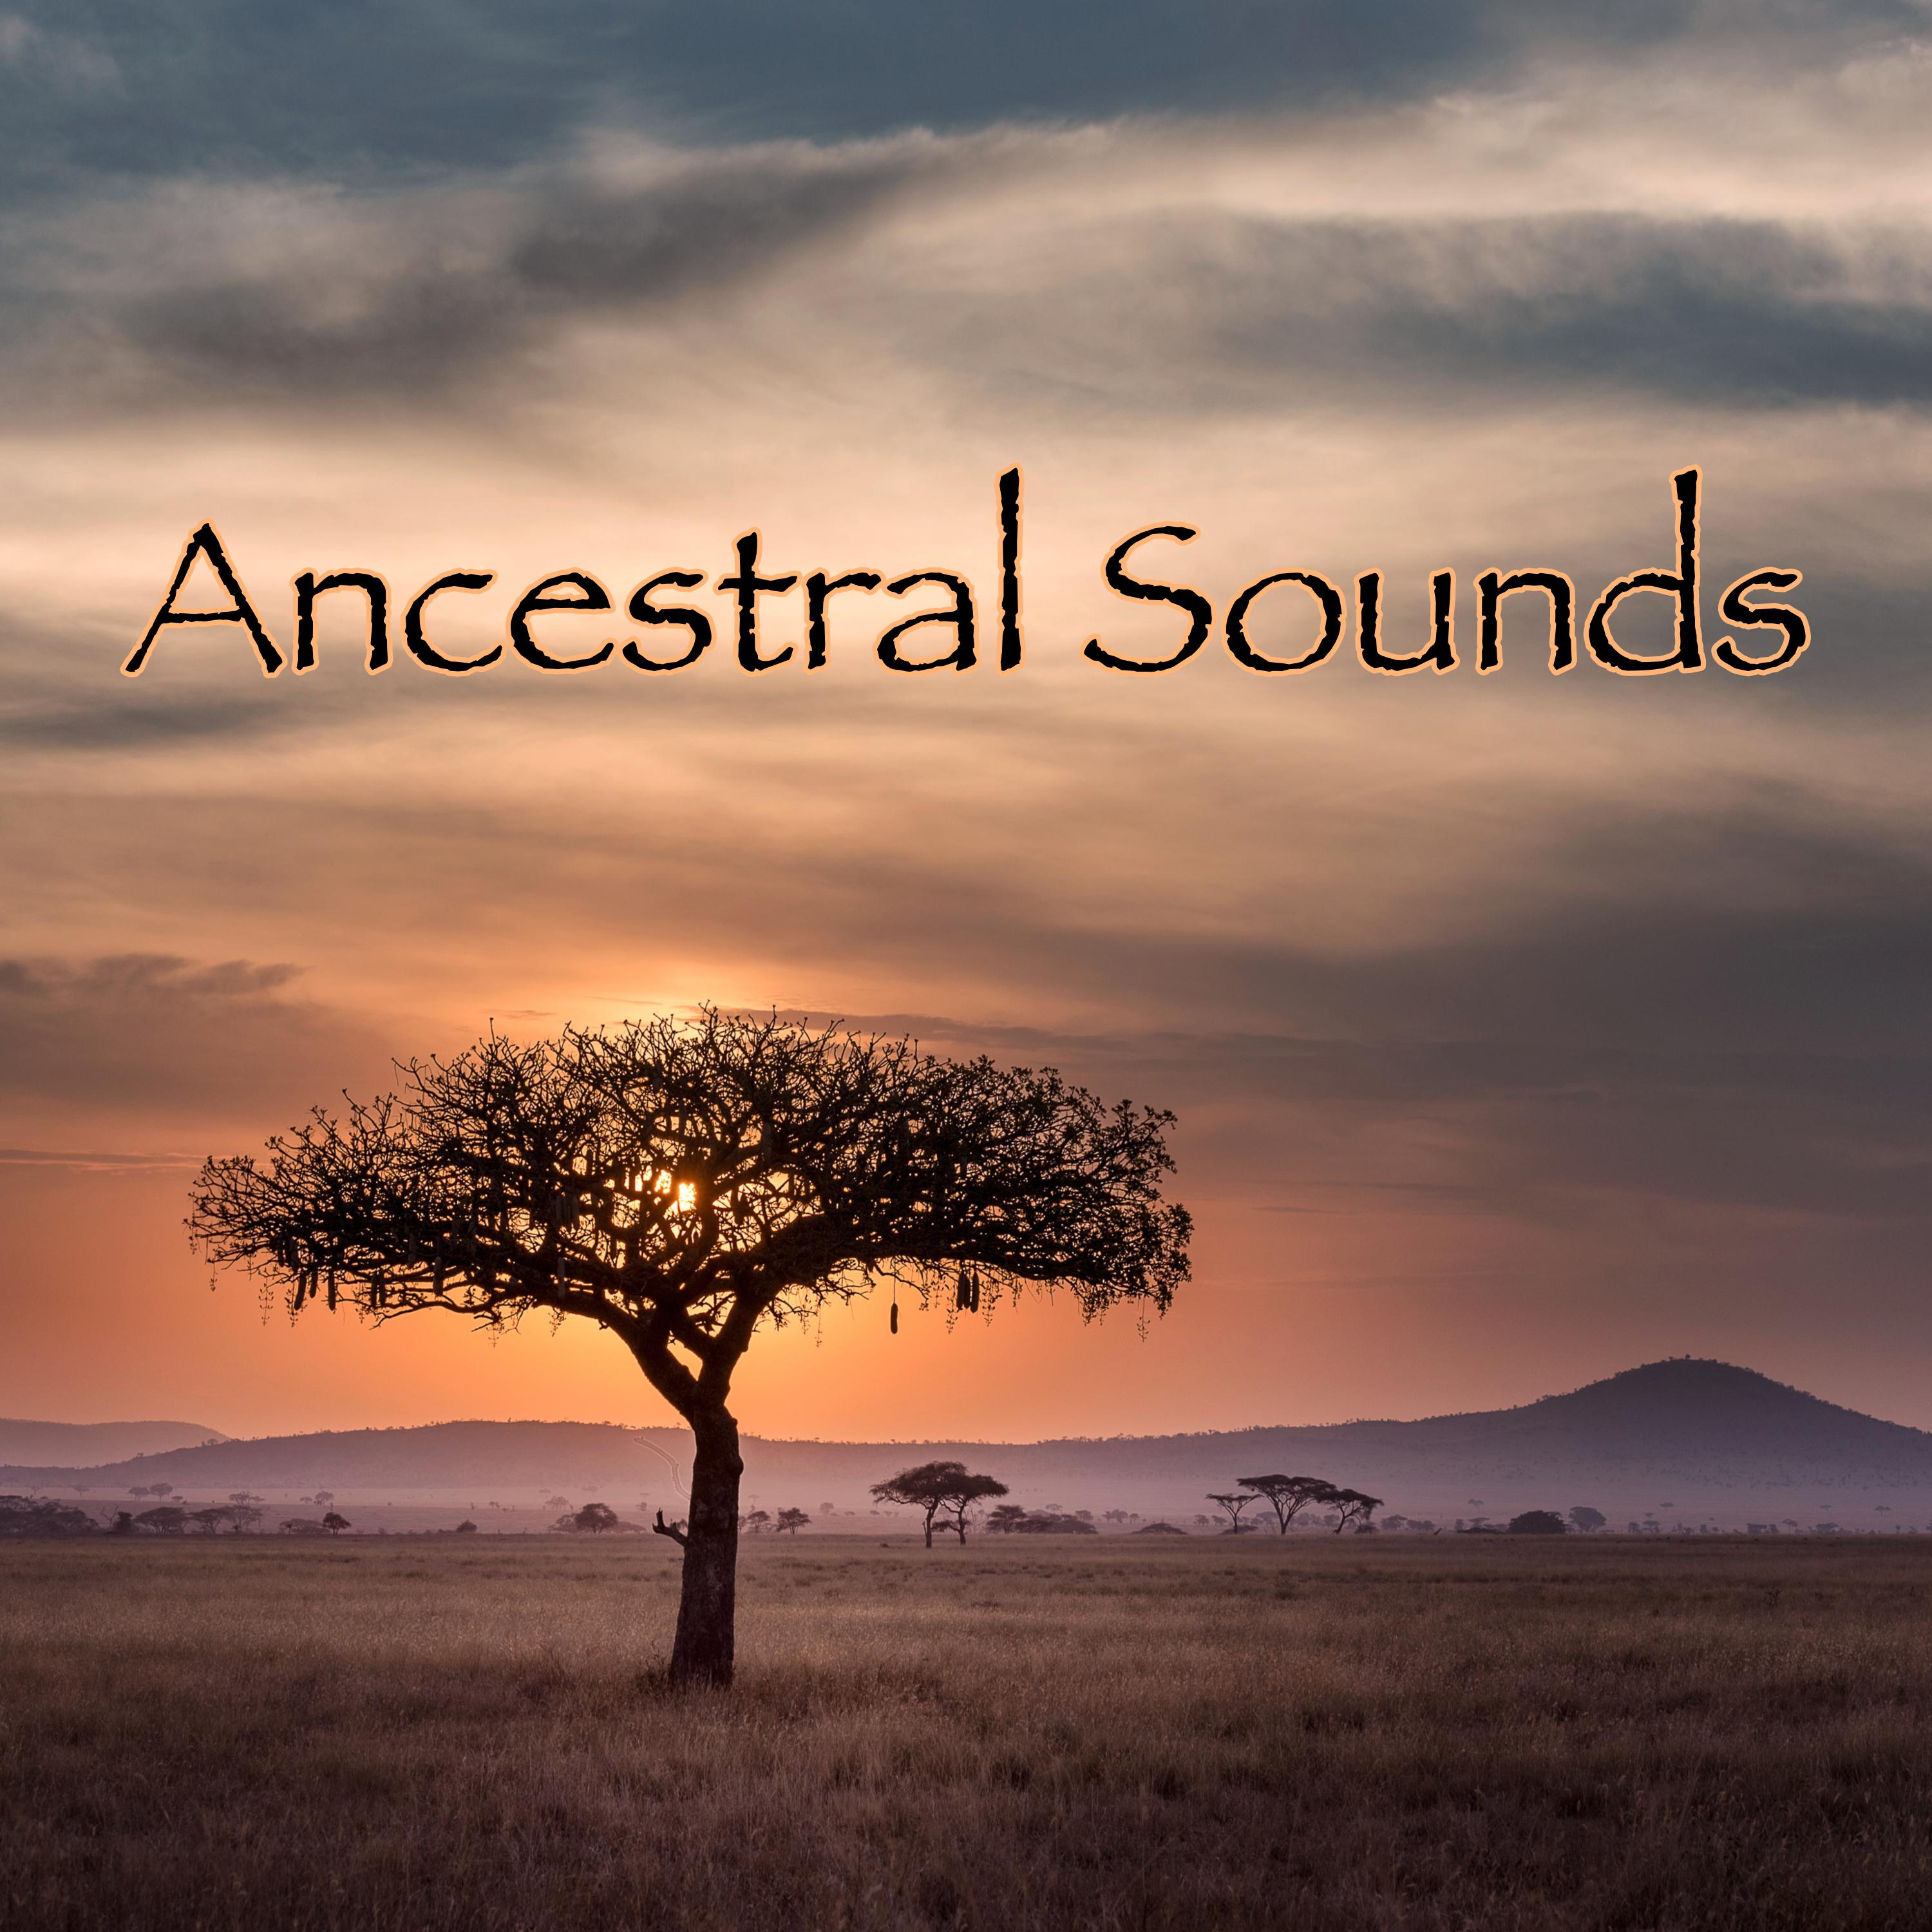 Ancestral Sounds  Tabla, Flutes, Drums and Other Ethno Music for Self Awakening